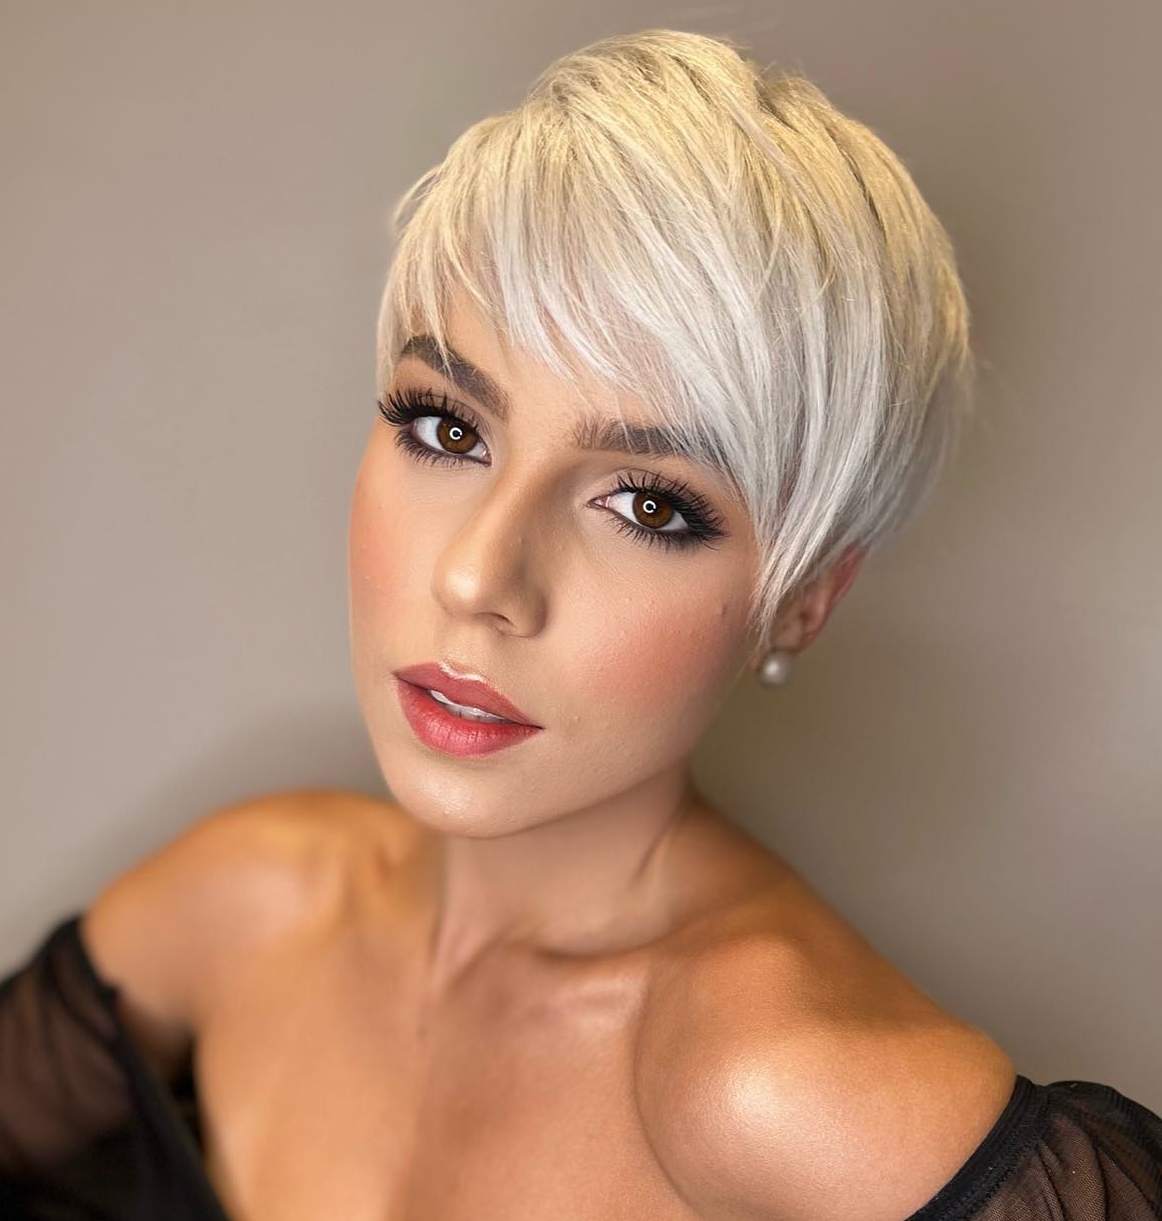 20 Short Blonde Hair Color Ideas to Try in 2023 - Hairstylery